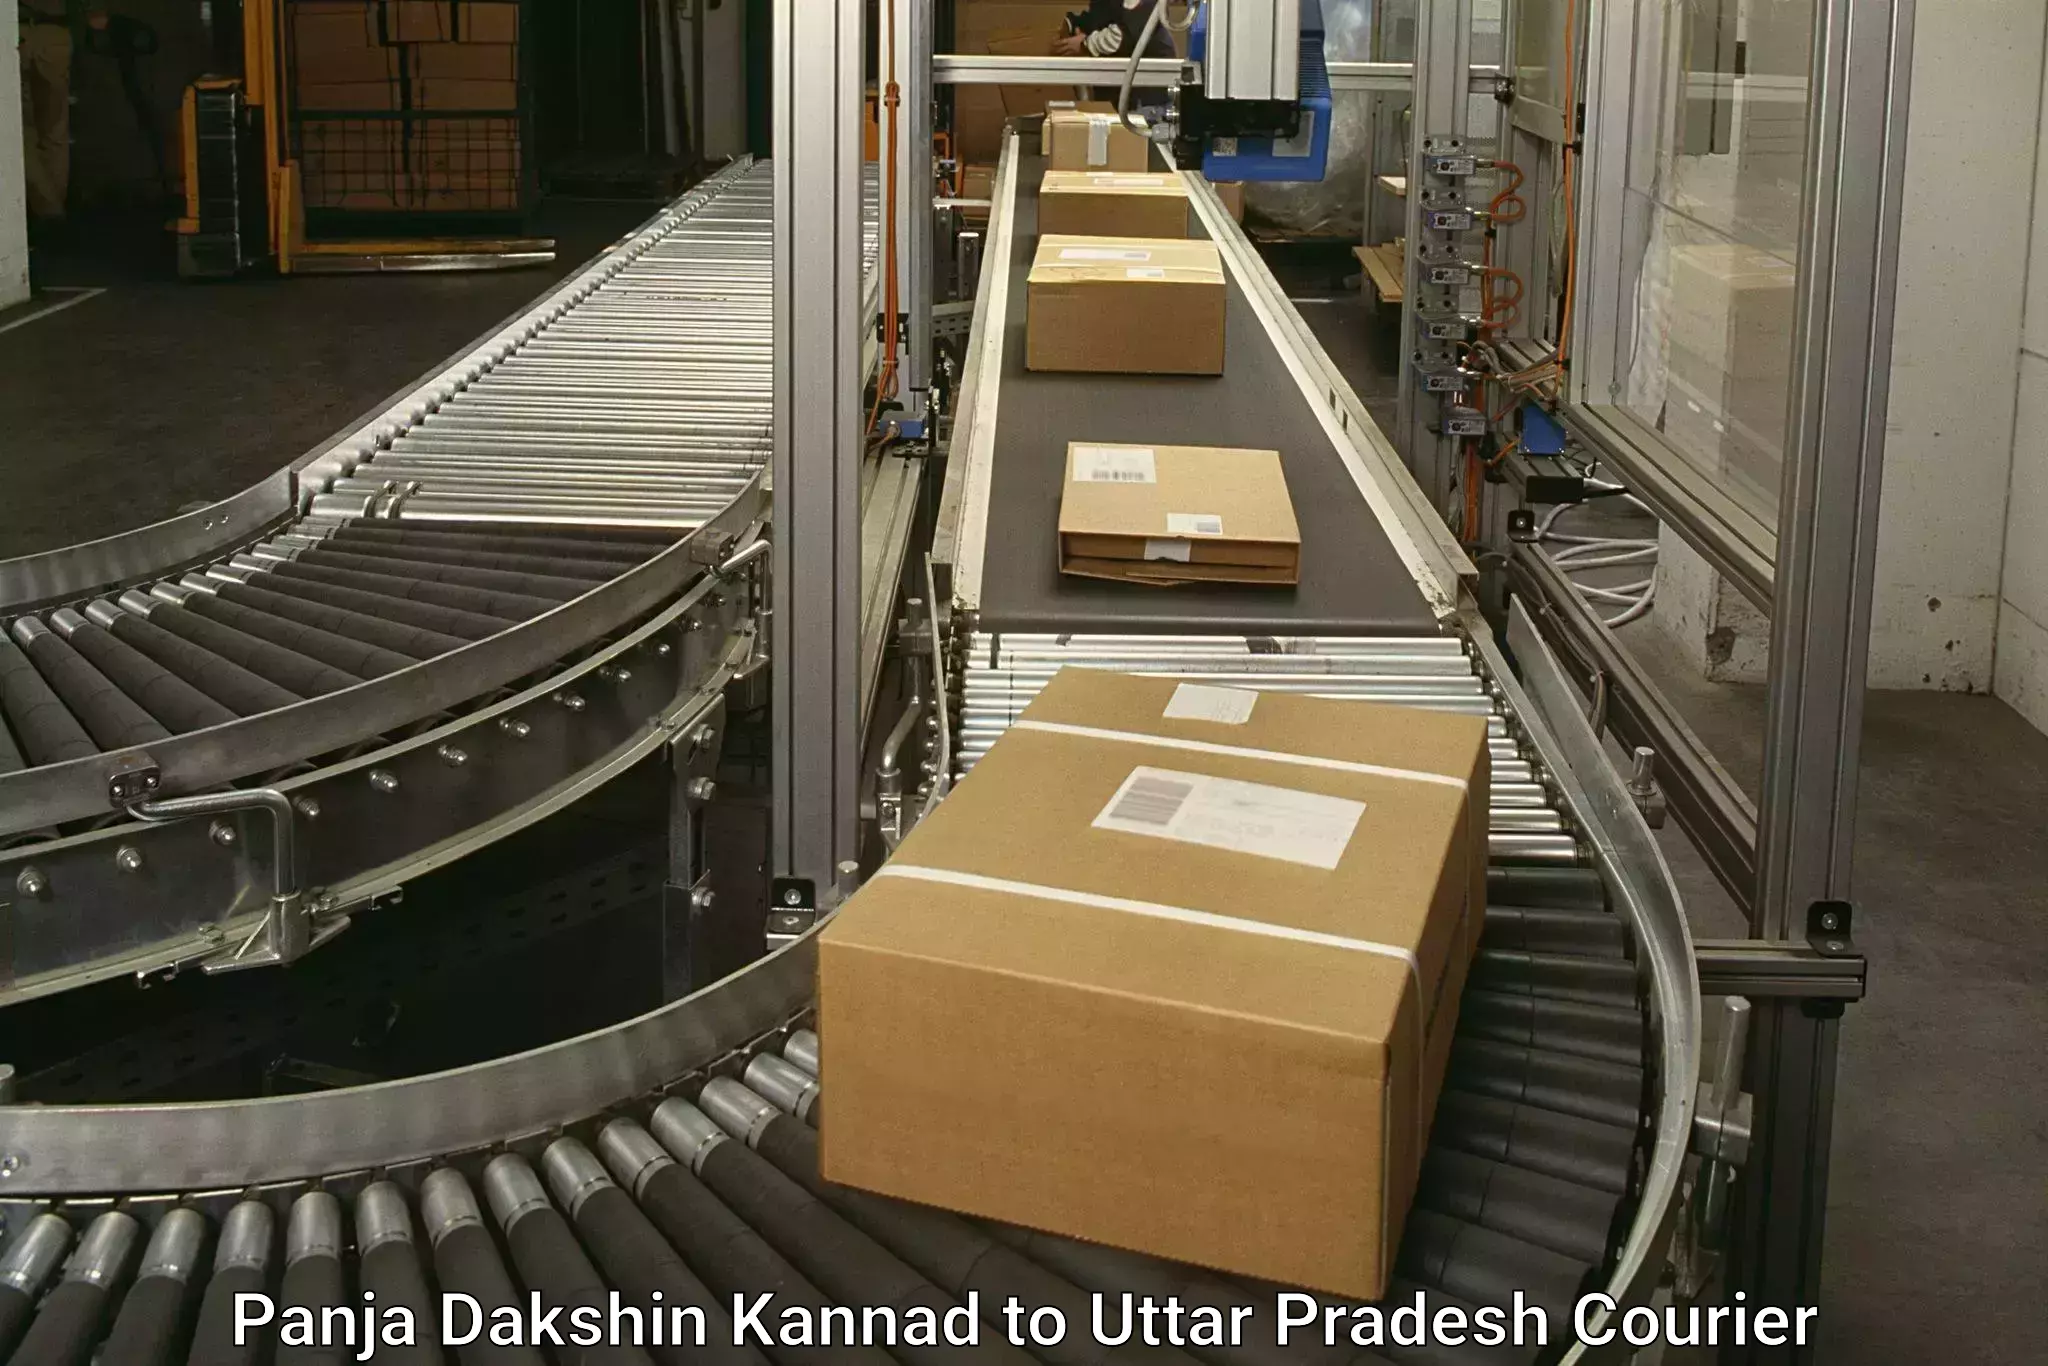 Flexible delivery schedules in Panja Dakshin Kannad to Sultanpur Avadh